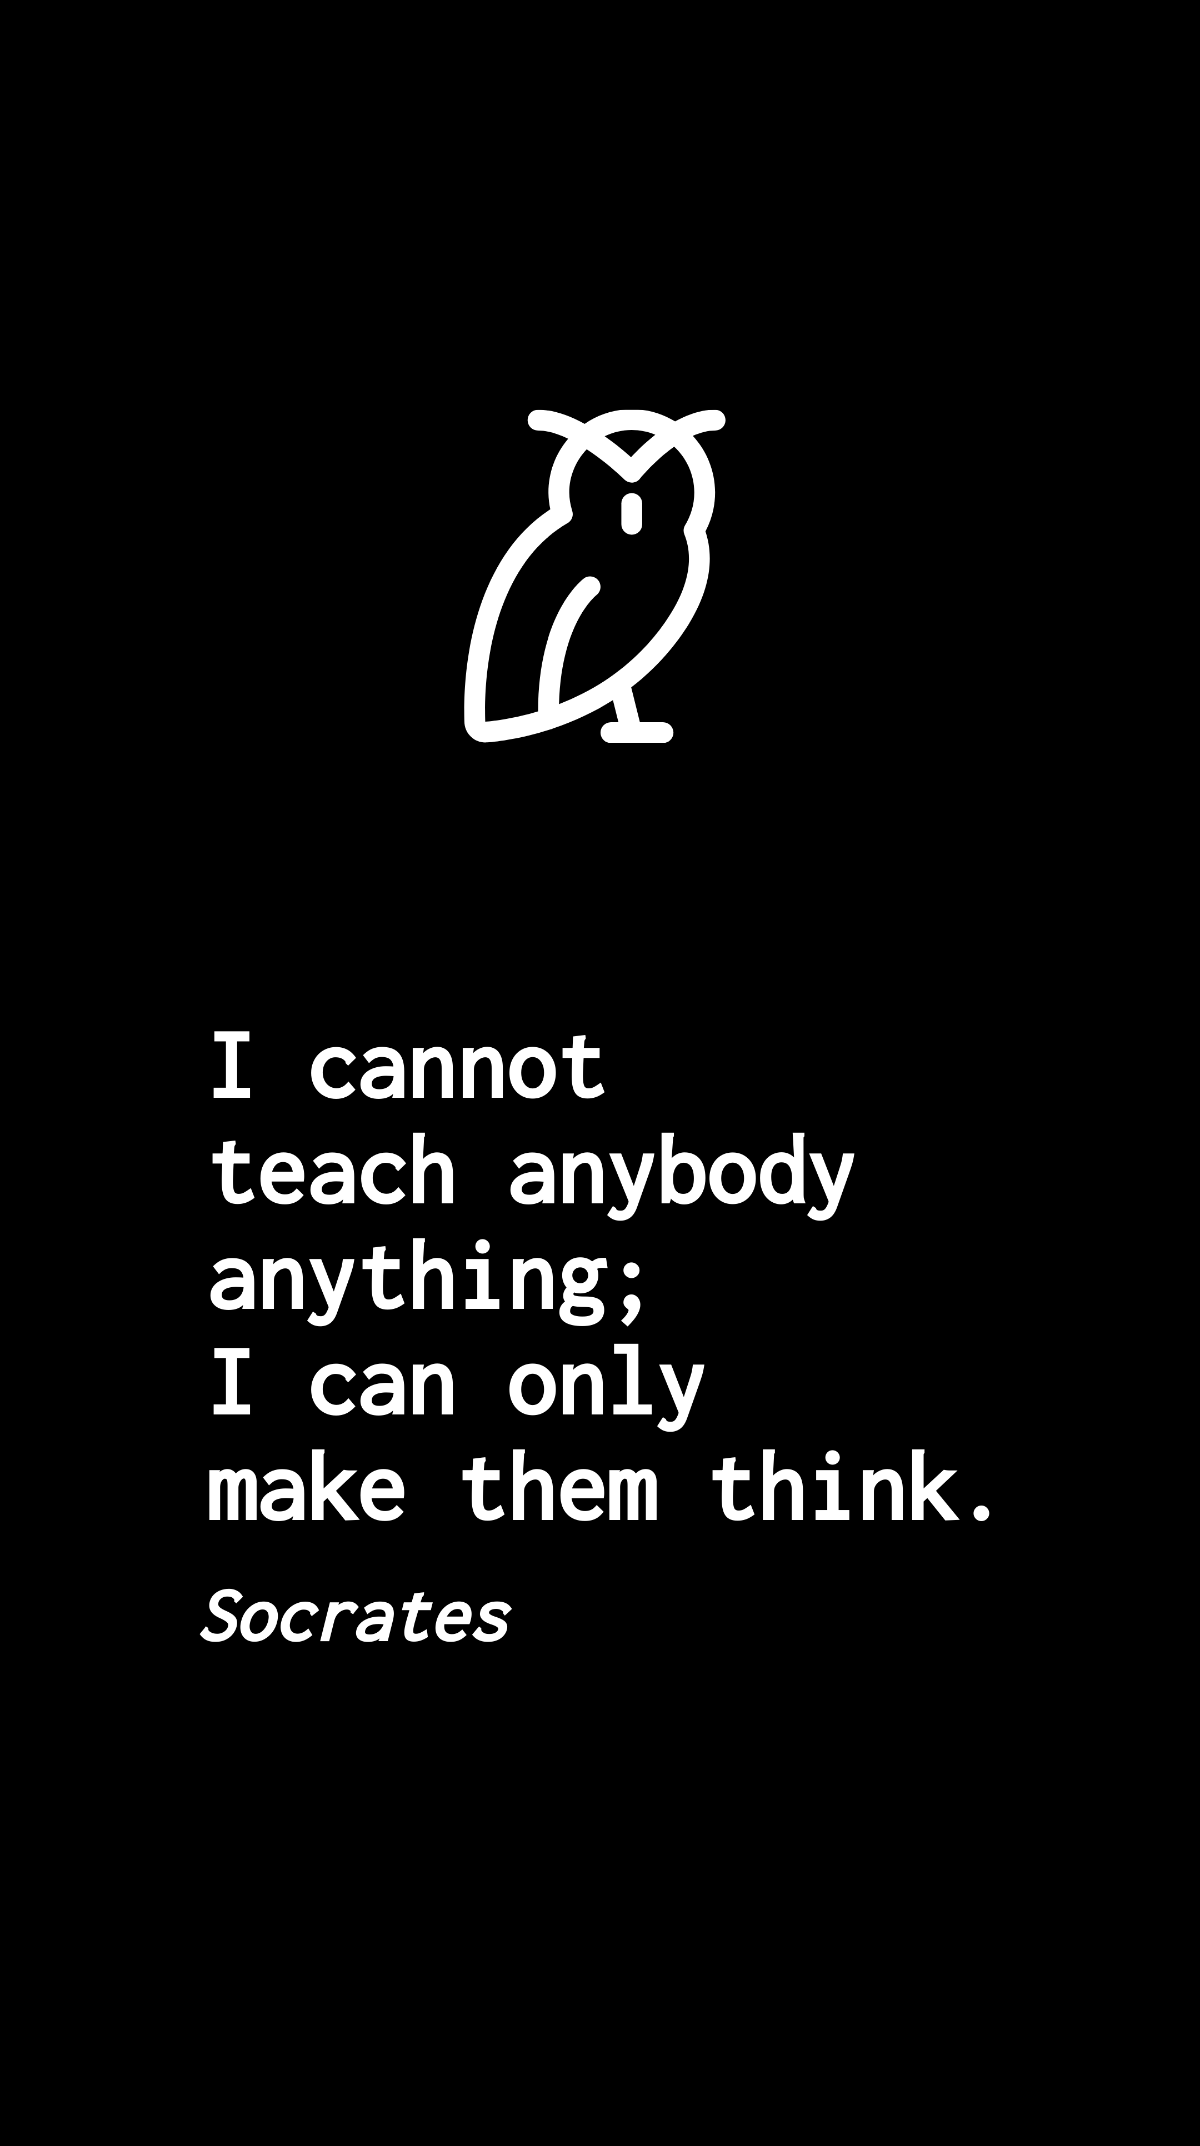 Socrates - I cannot teach anybody anything; I can only make them think. Template